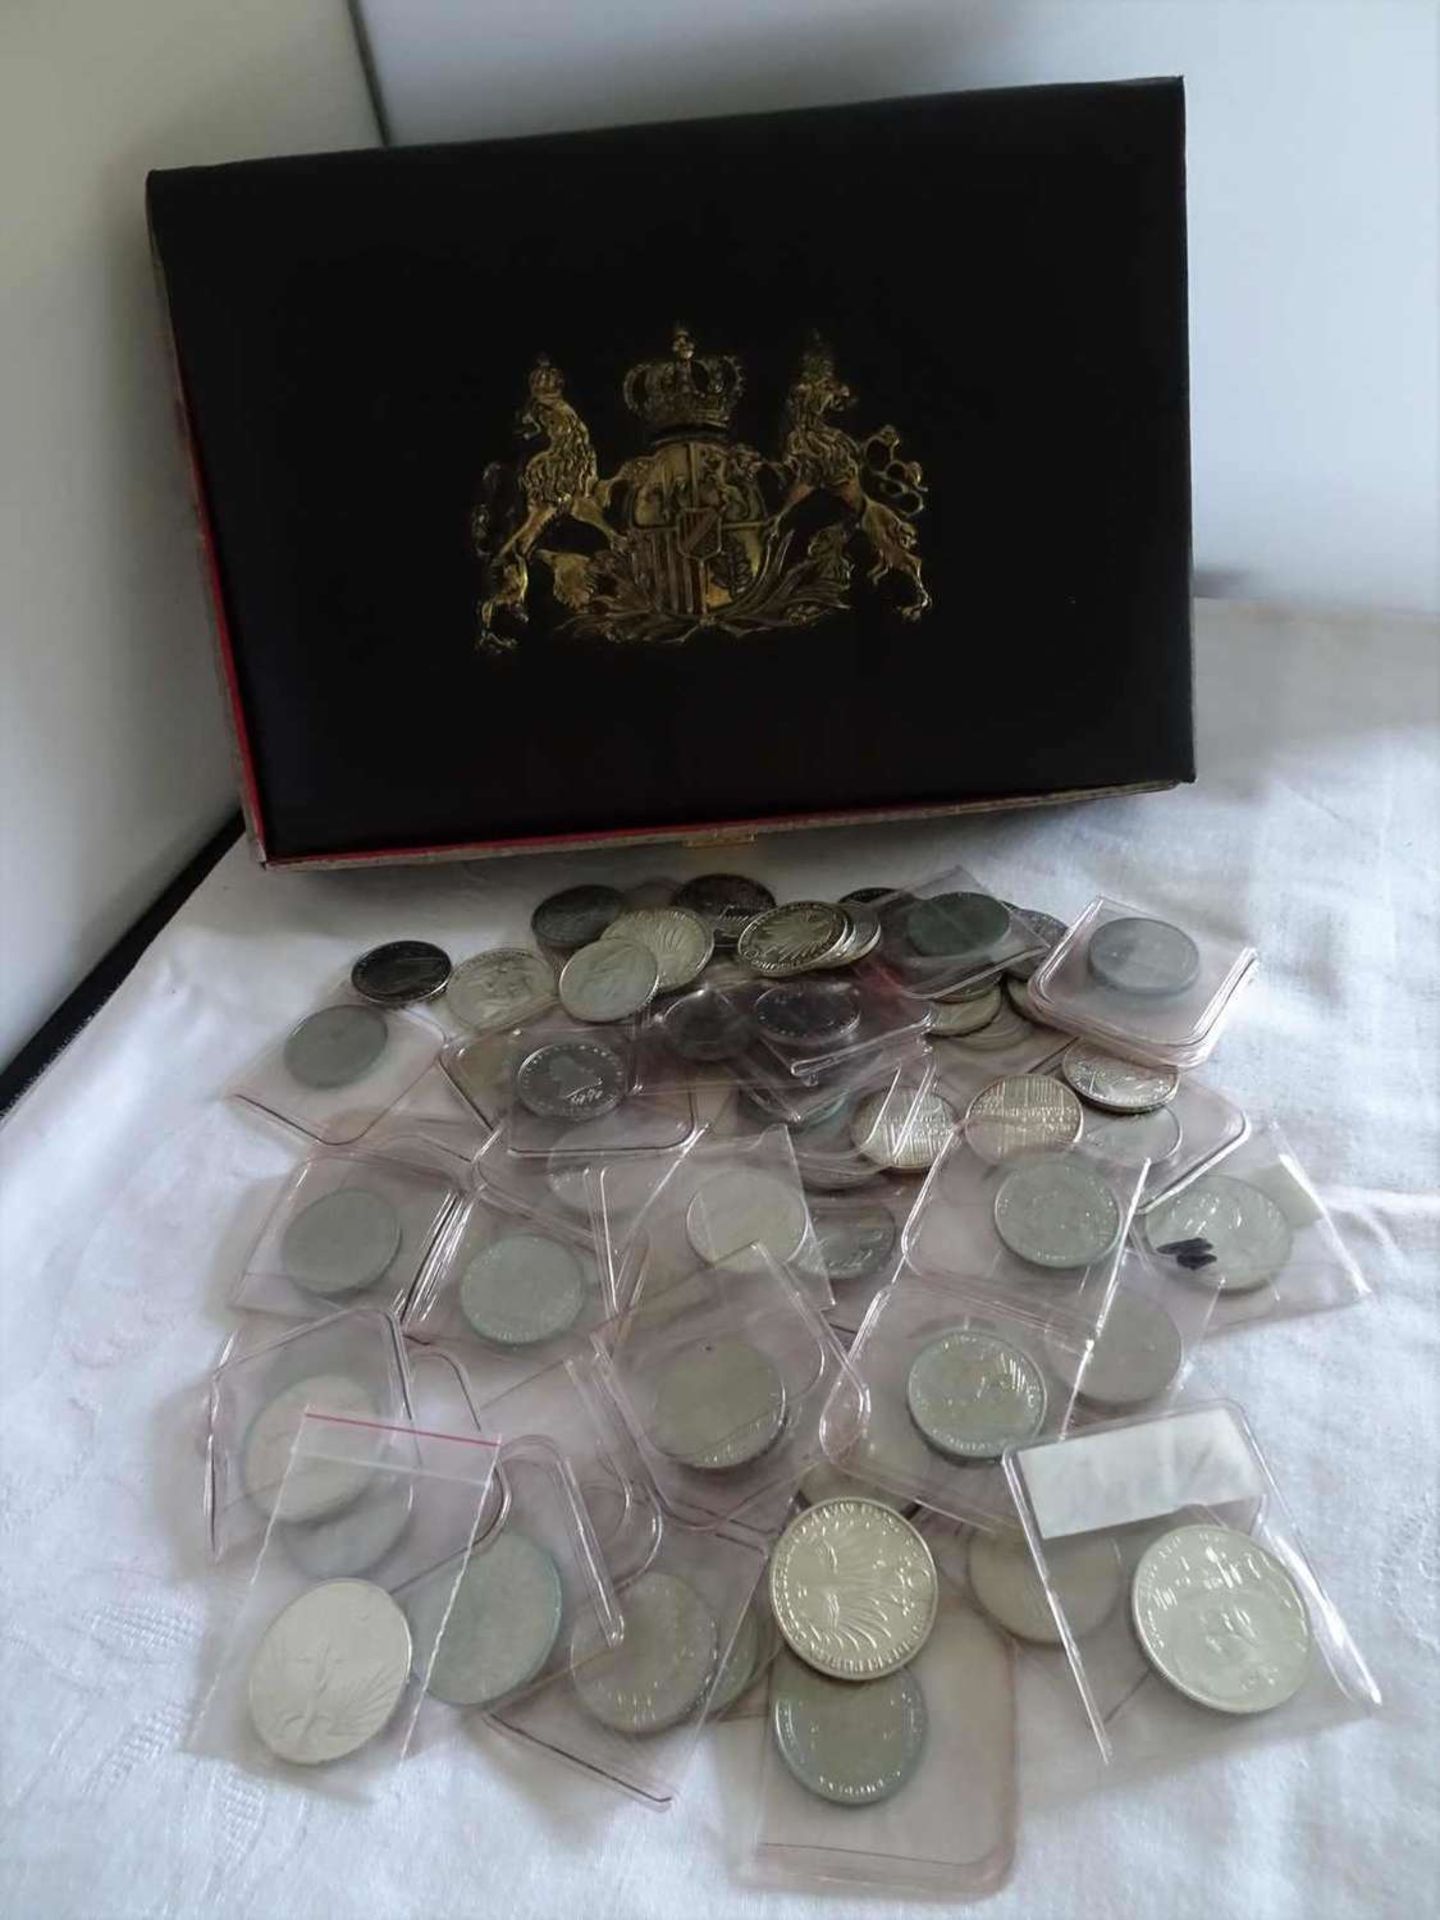 Lot FRG coins, 5 and 10 DM pieces, thereby 61x 5 DM, 15x 10 DM, a total of 455 DM.